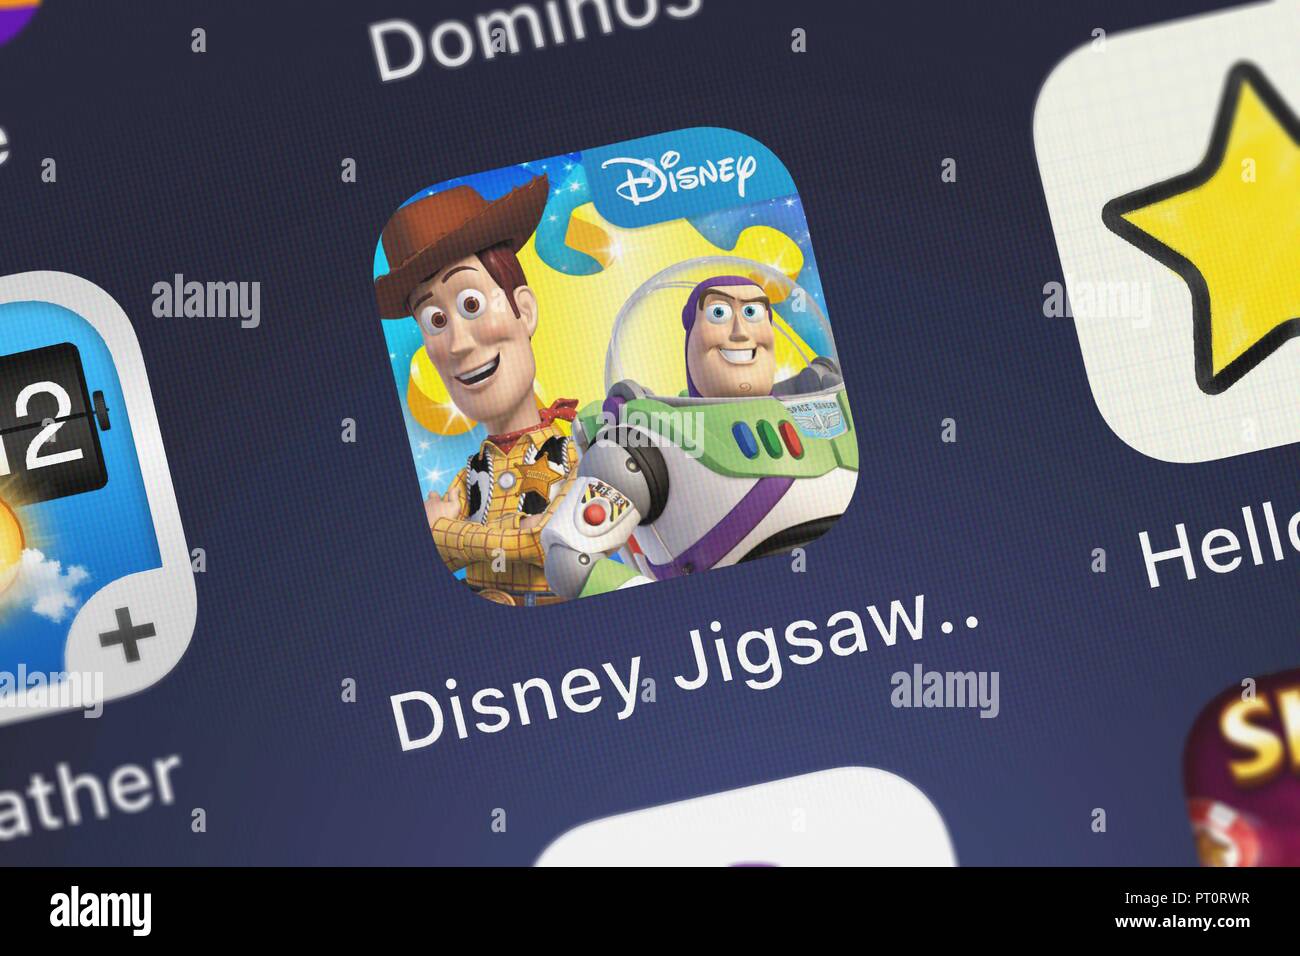 London, United Kingdom - October 05, 2018: The Disney Jigsaw Puzzles mobile  app from Disney on an iPhone screen Stock Photo - Alamy